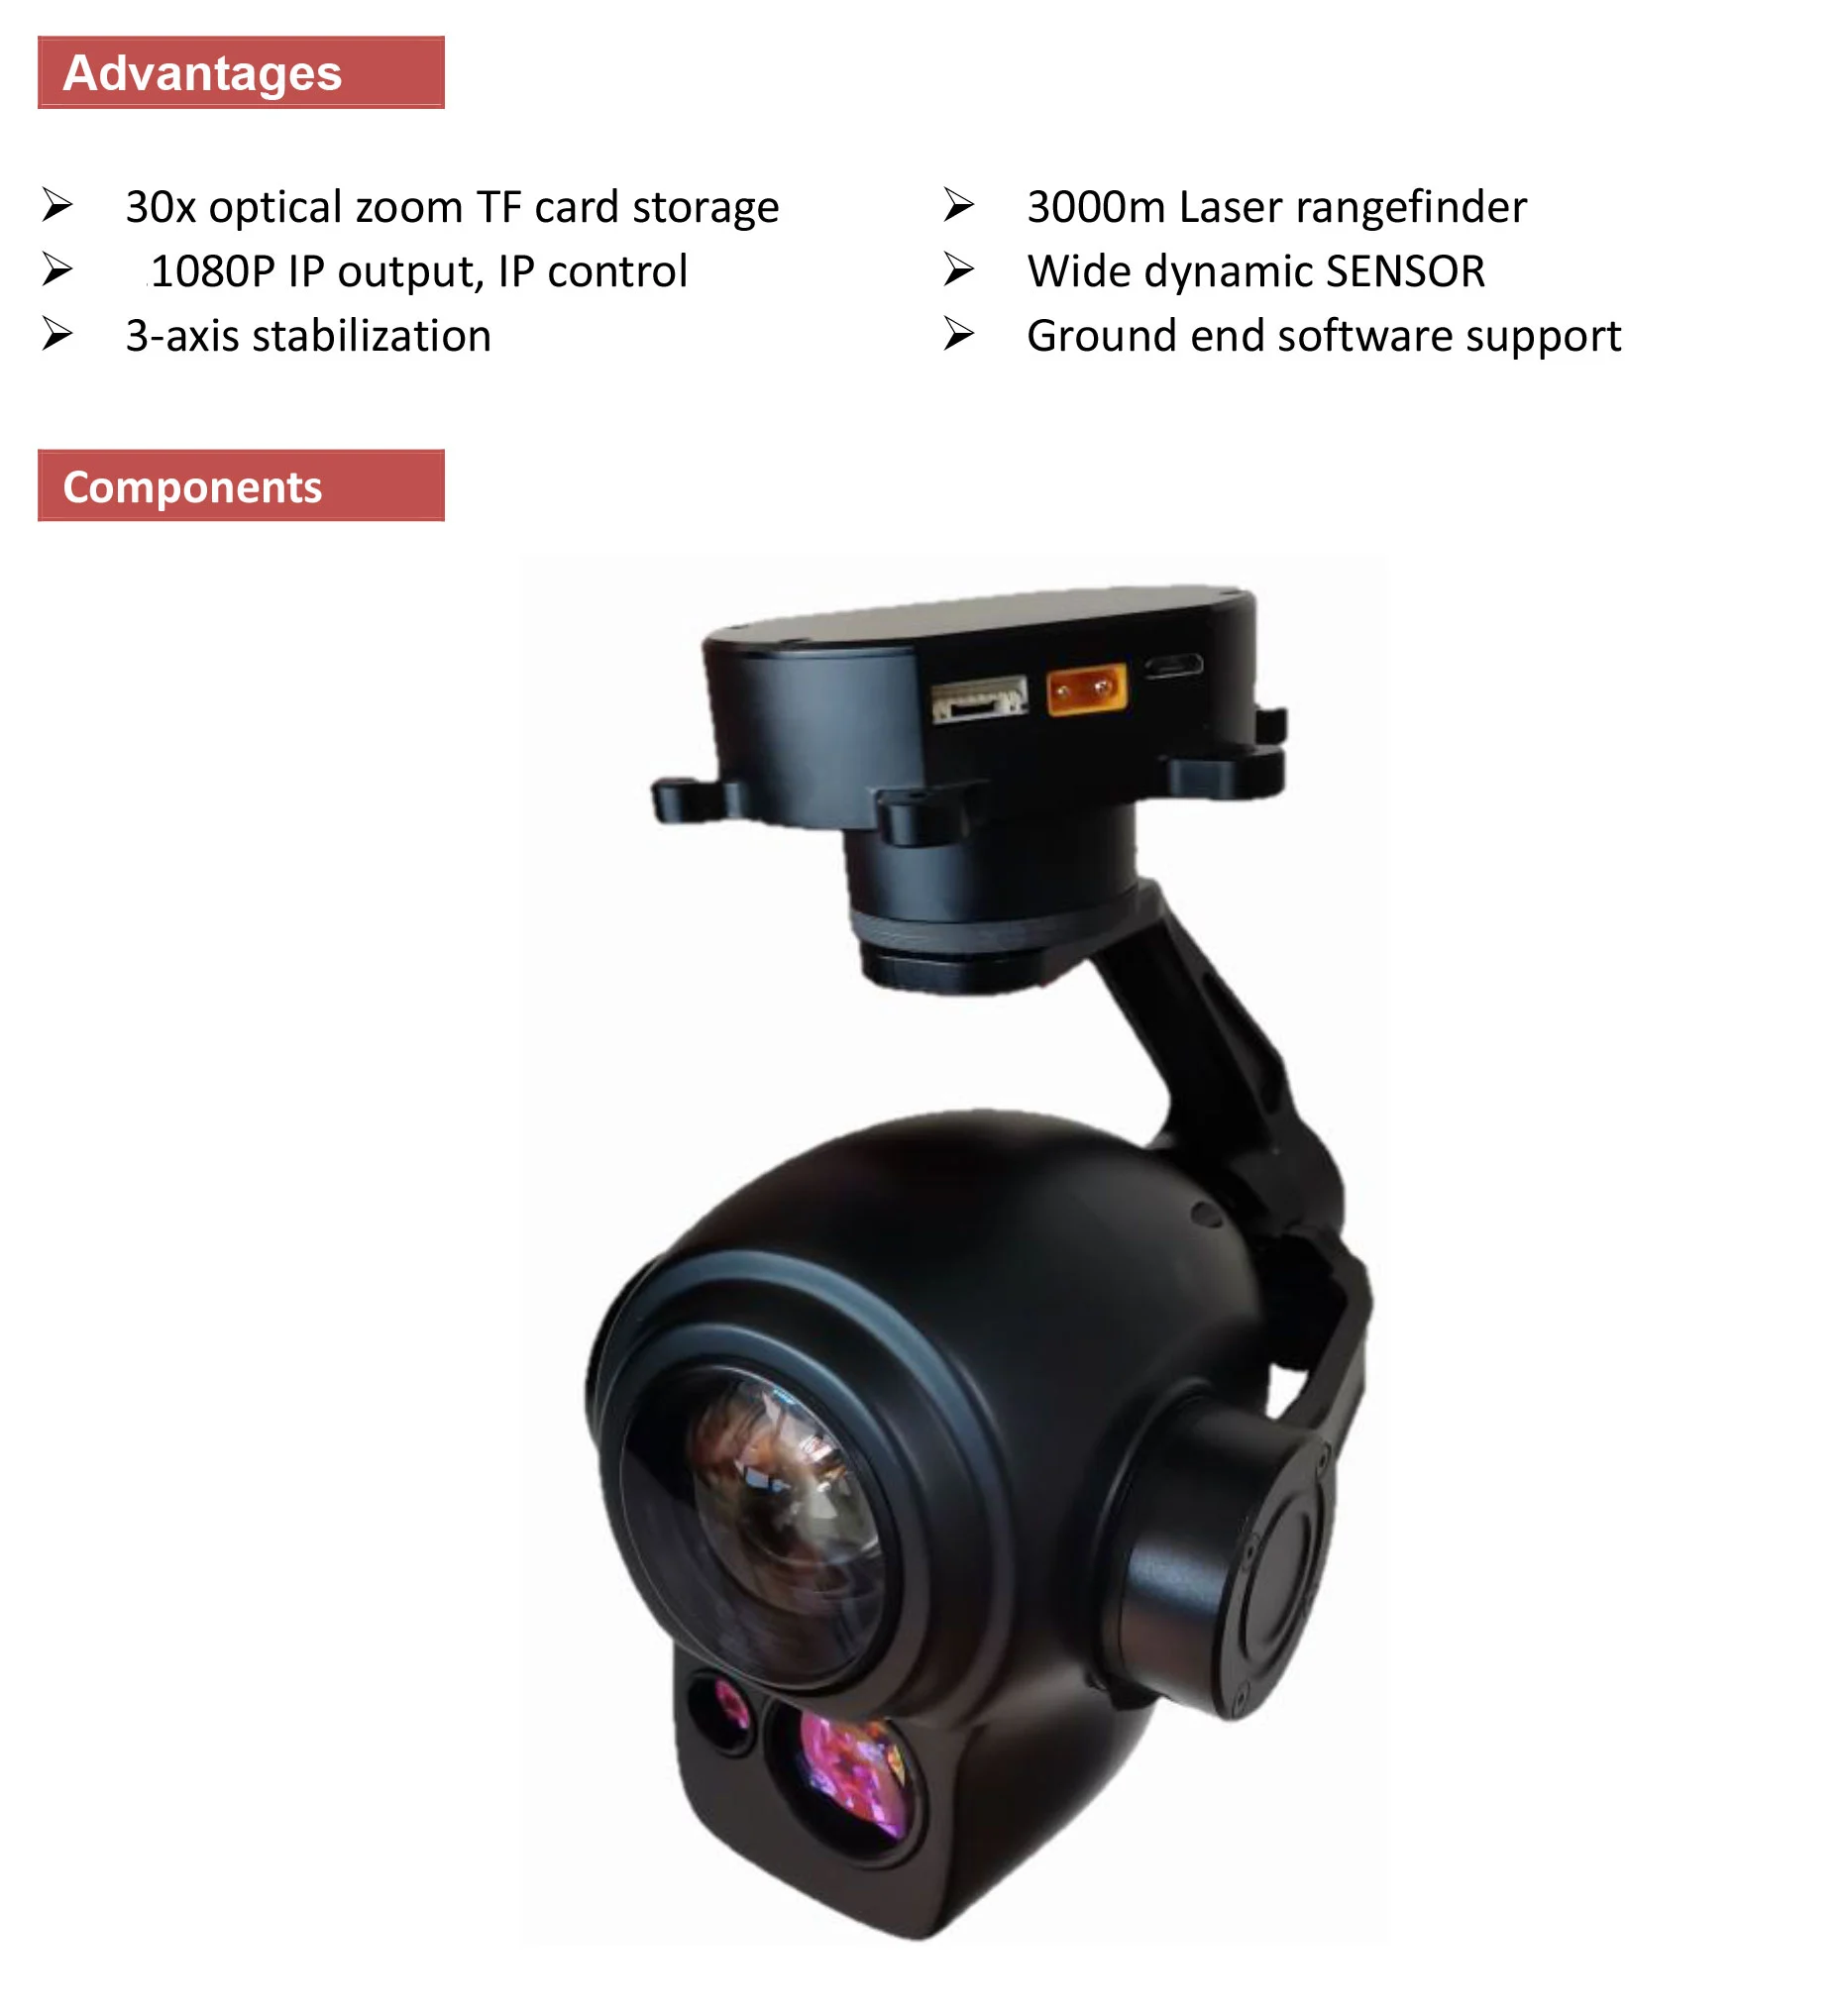 SIP30L30A 30x optical zoom + 3000m laser range finder 3-axis stabilized  IP output gimbal